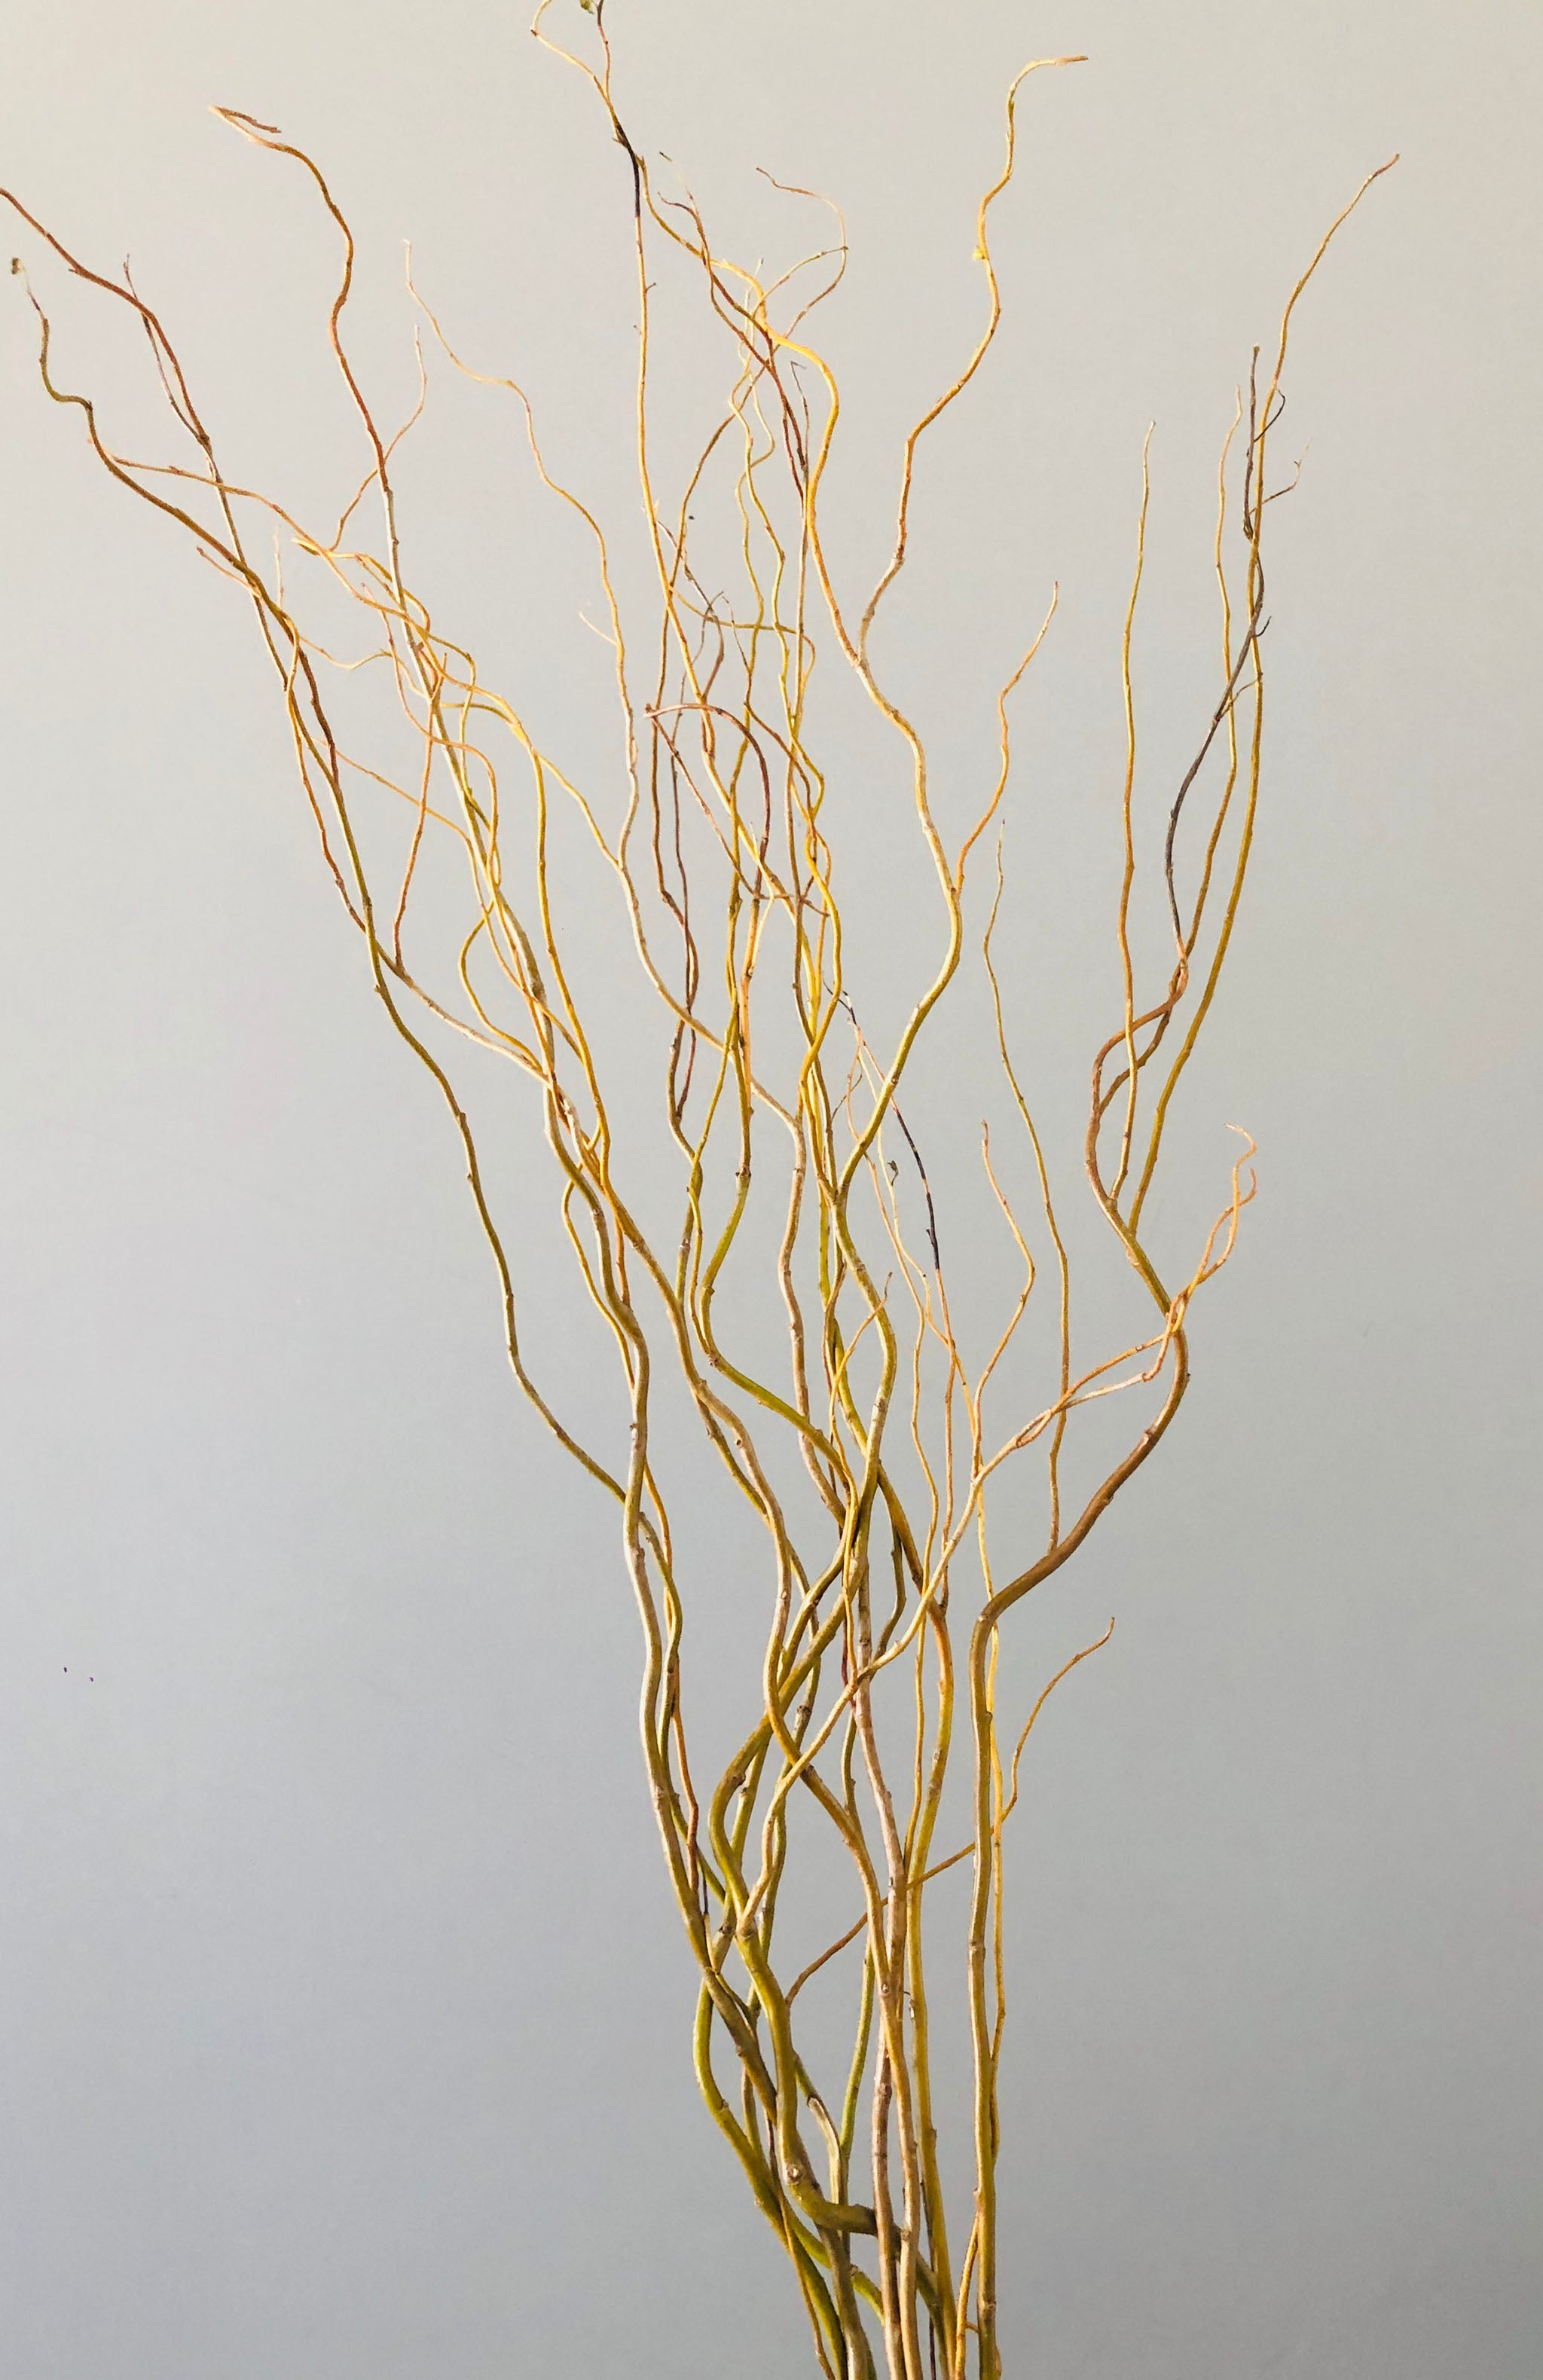 Kalalou Bleached Willow Branches - Set Of 6 - Natural – Modish Store